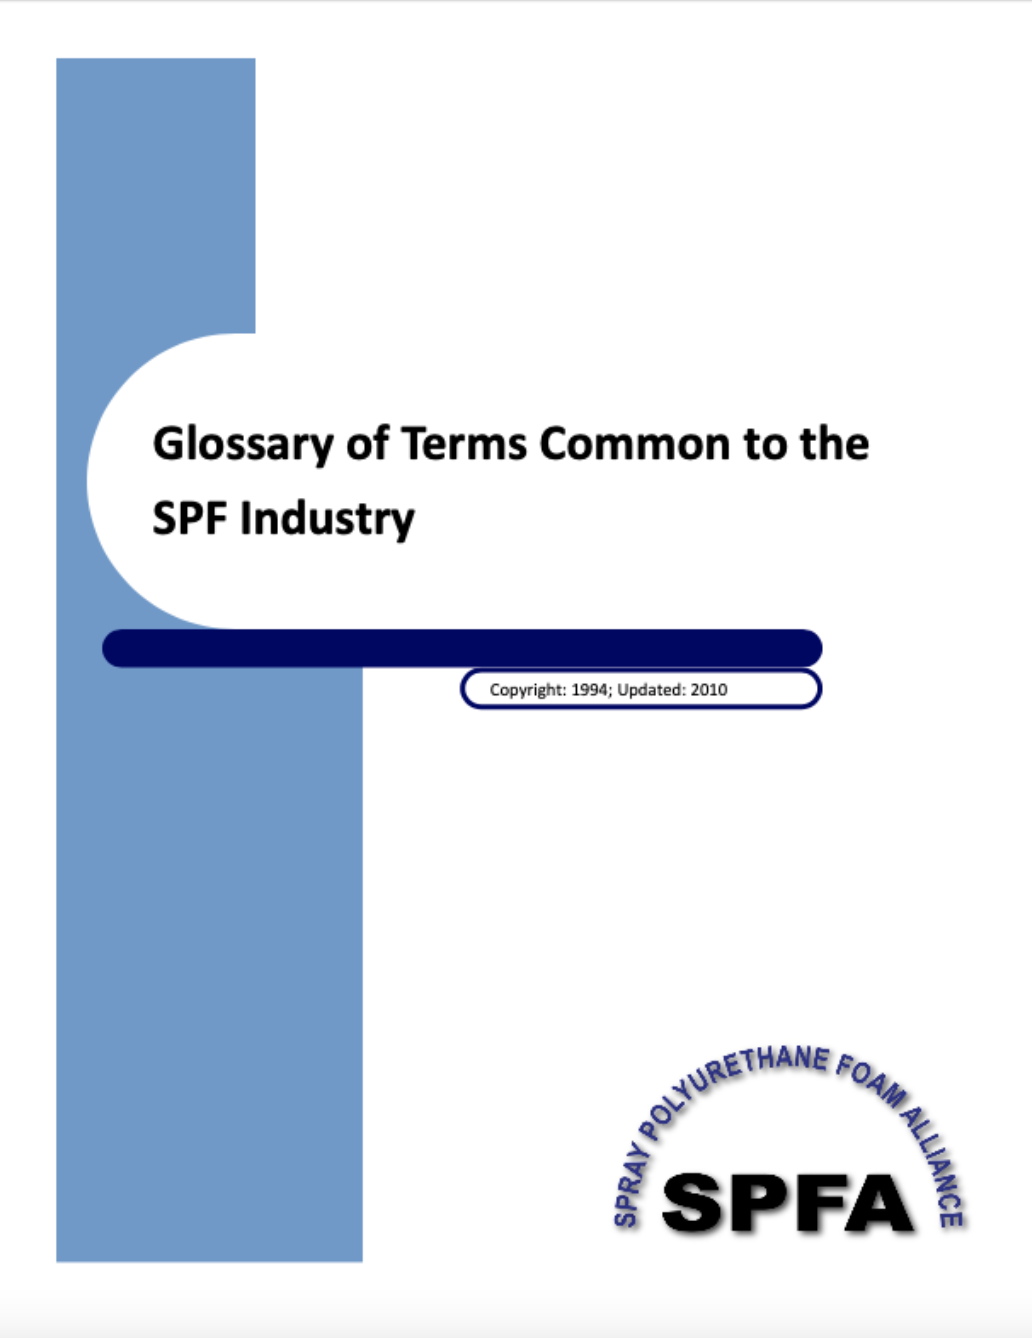 Glossary-of-Terms-AY-119-2010